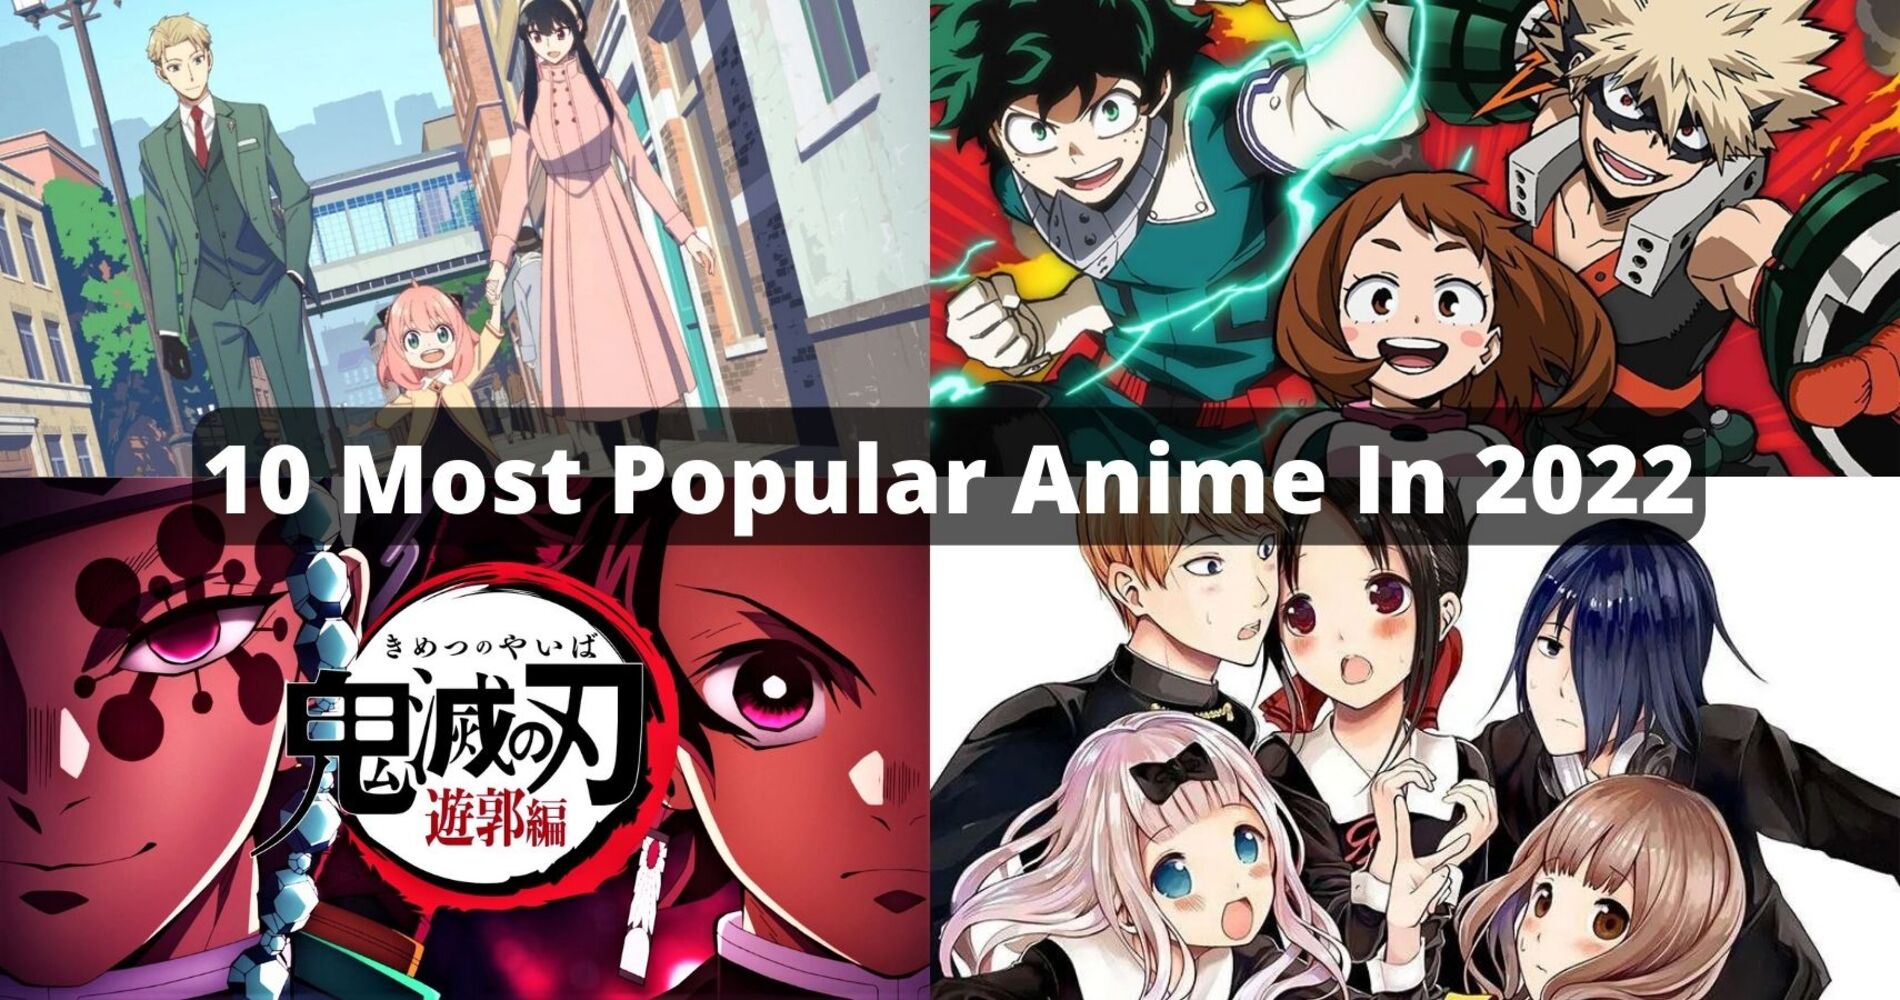 10 Most Popular Anime In 2022